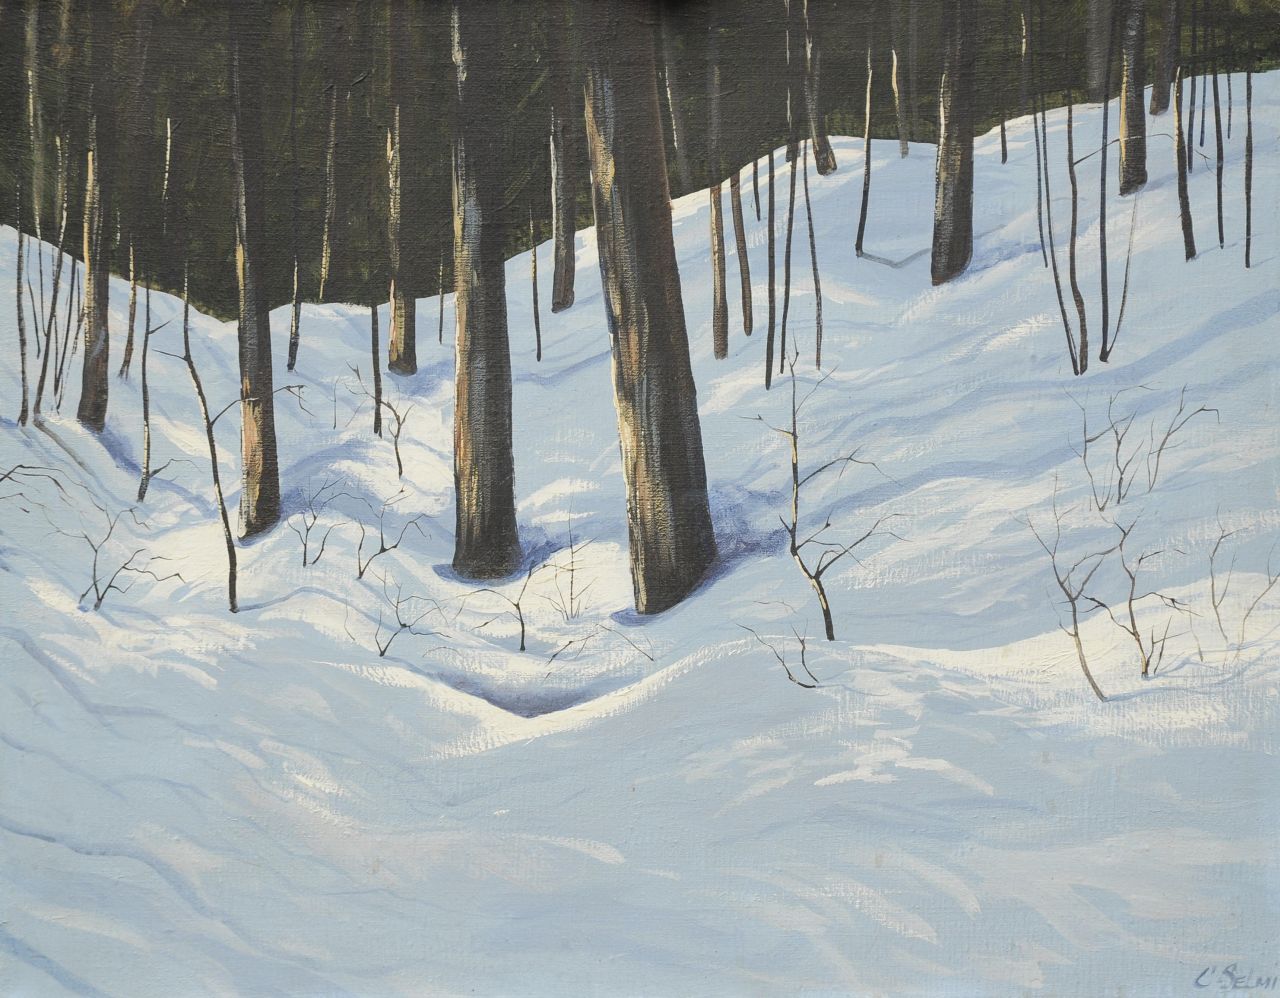 Selmi Ch.  | Charles Selmi | Paintings offered for sale | Winter forest, oil on canvas 50.0 x 60.0 cm, signed l.r.